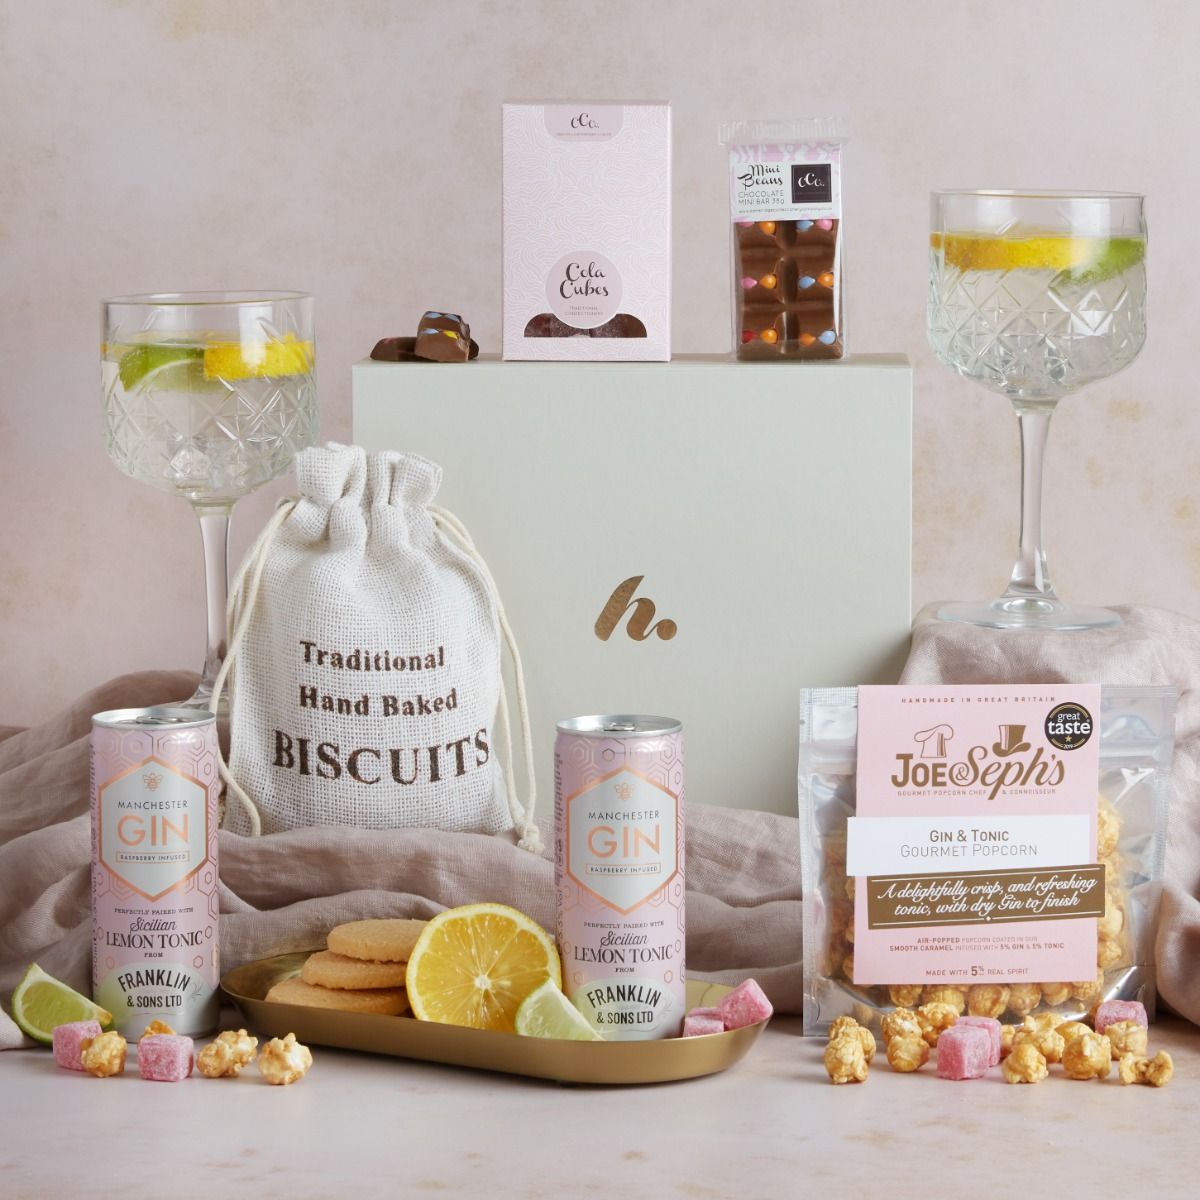 Gin & treats hamper with contents on display, glasses of gin and tonic and a signature cream gift box